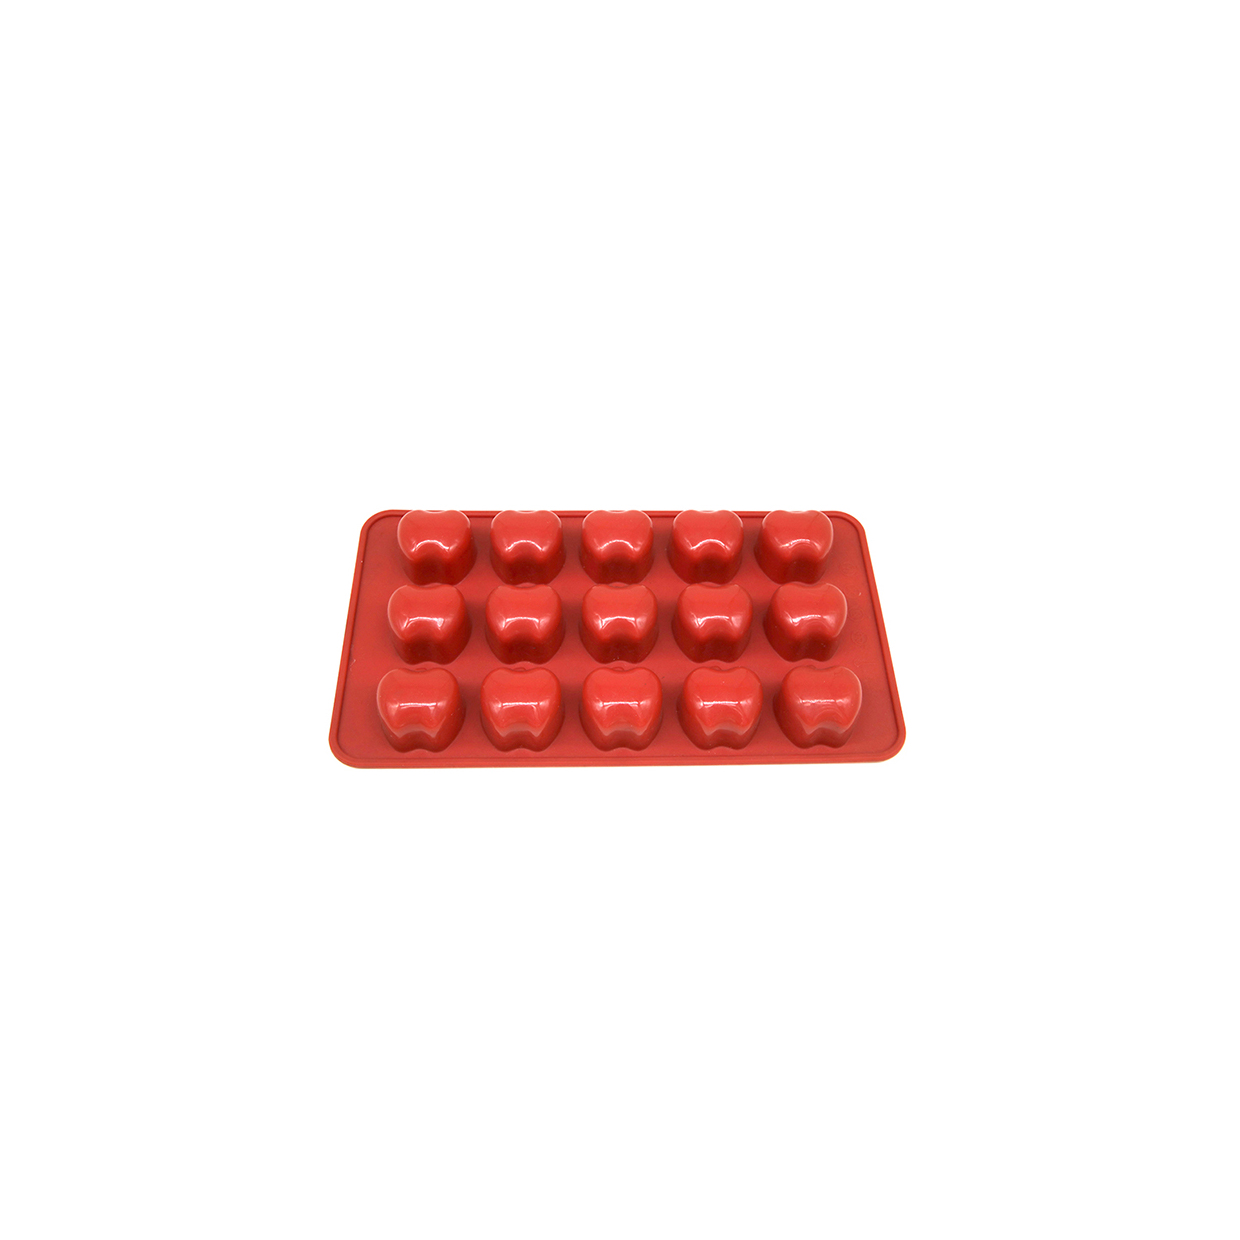 silicone chocolate mould | IC013 Applce chocolate mould/cake mould